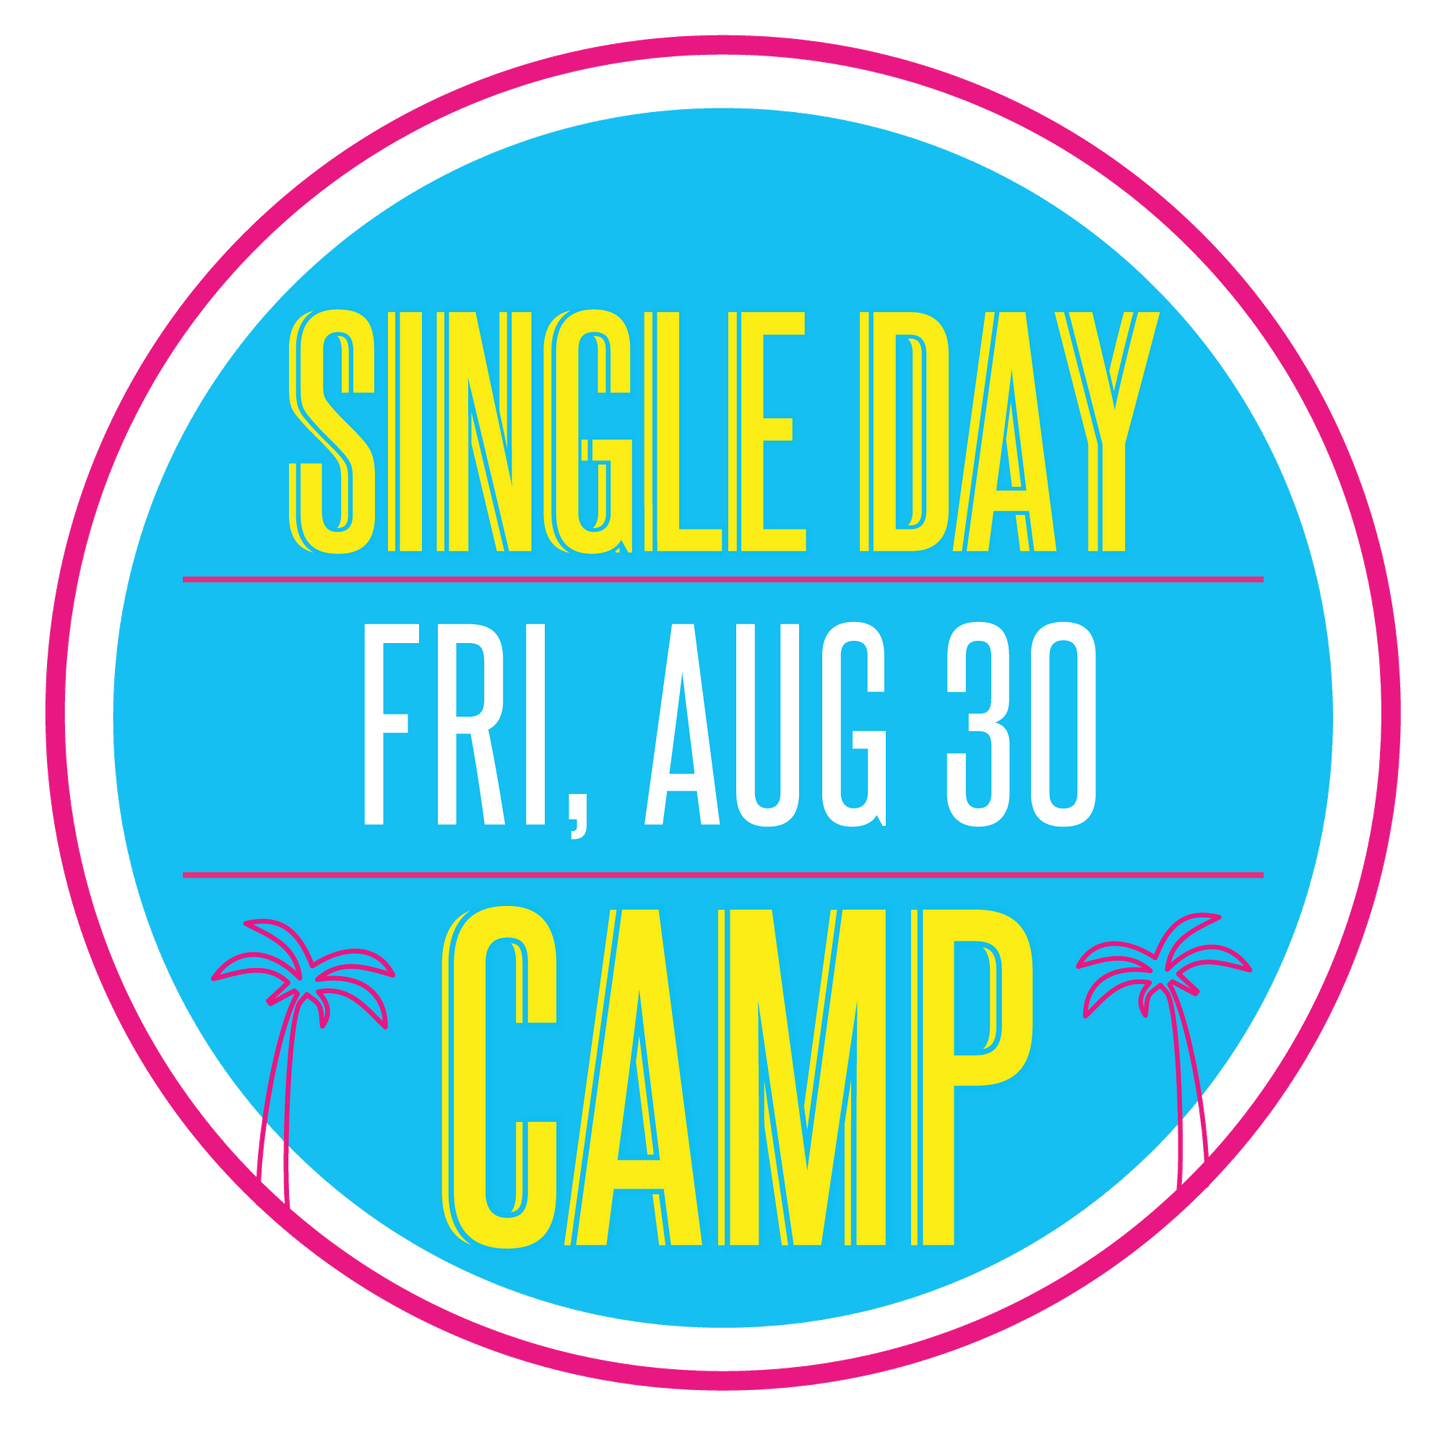 Single Day Sewing Workshop: Friday, August 30, 9am-3pm